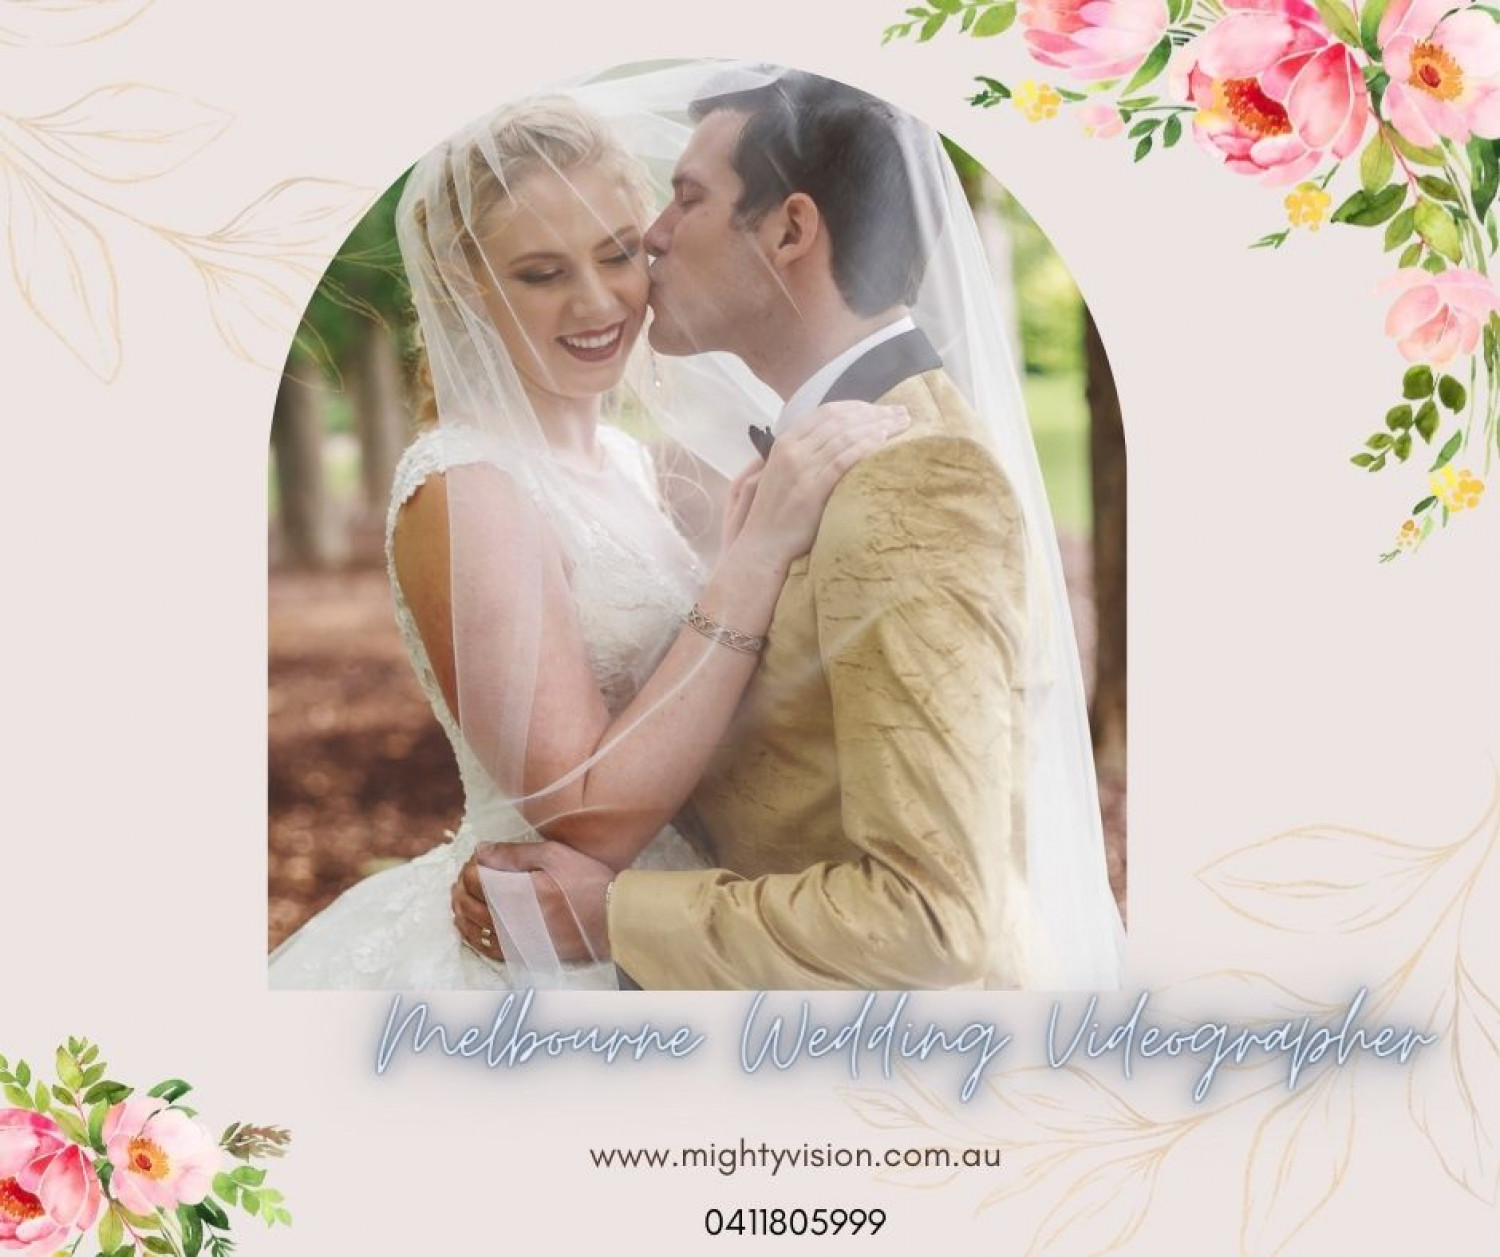 Top Wedding Videographer in Melbourne Infographic